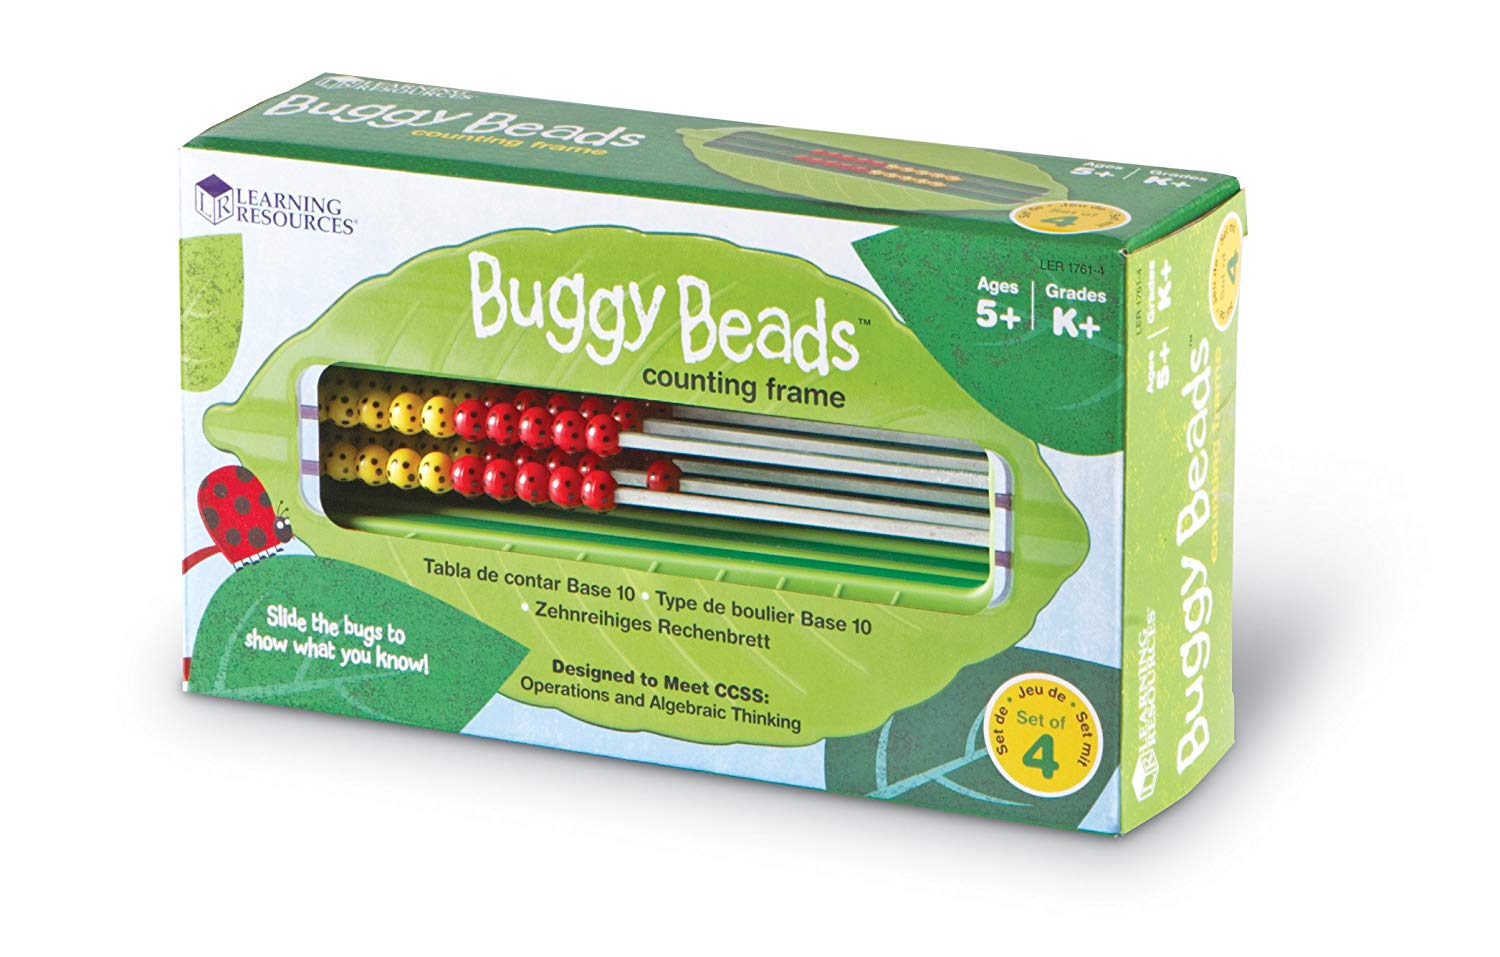 Buggy Beads Counting Frame